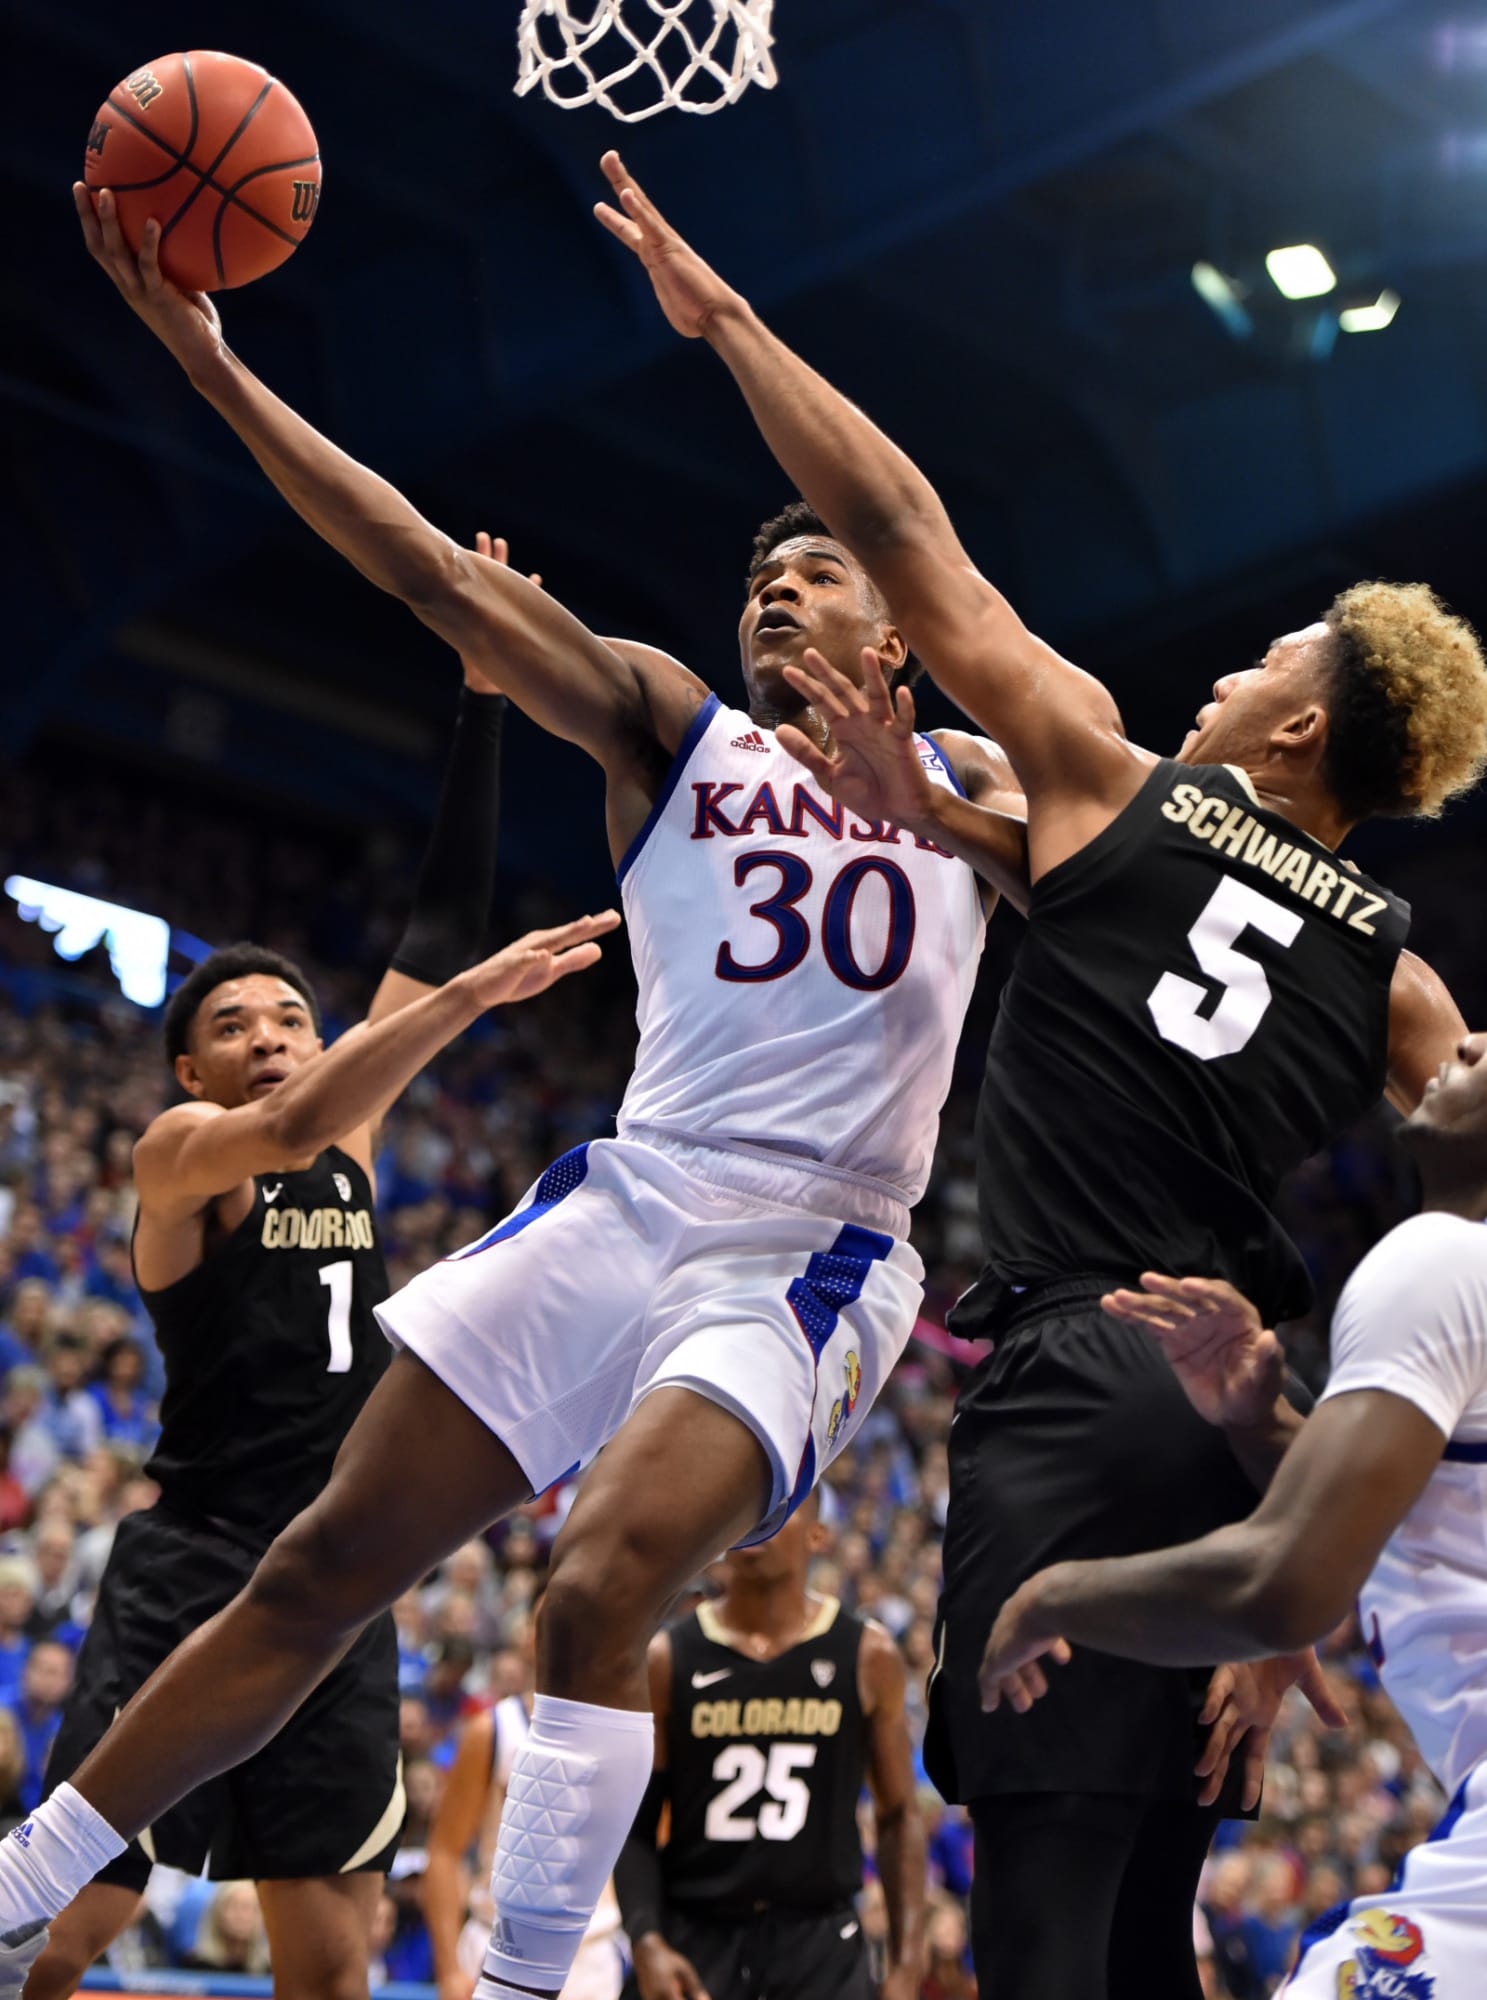 Watch: Kansas basketball highlights vs. formerly undefeated Colorado